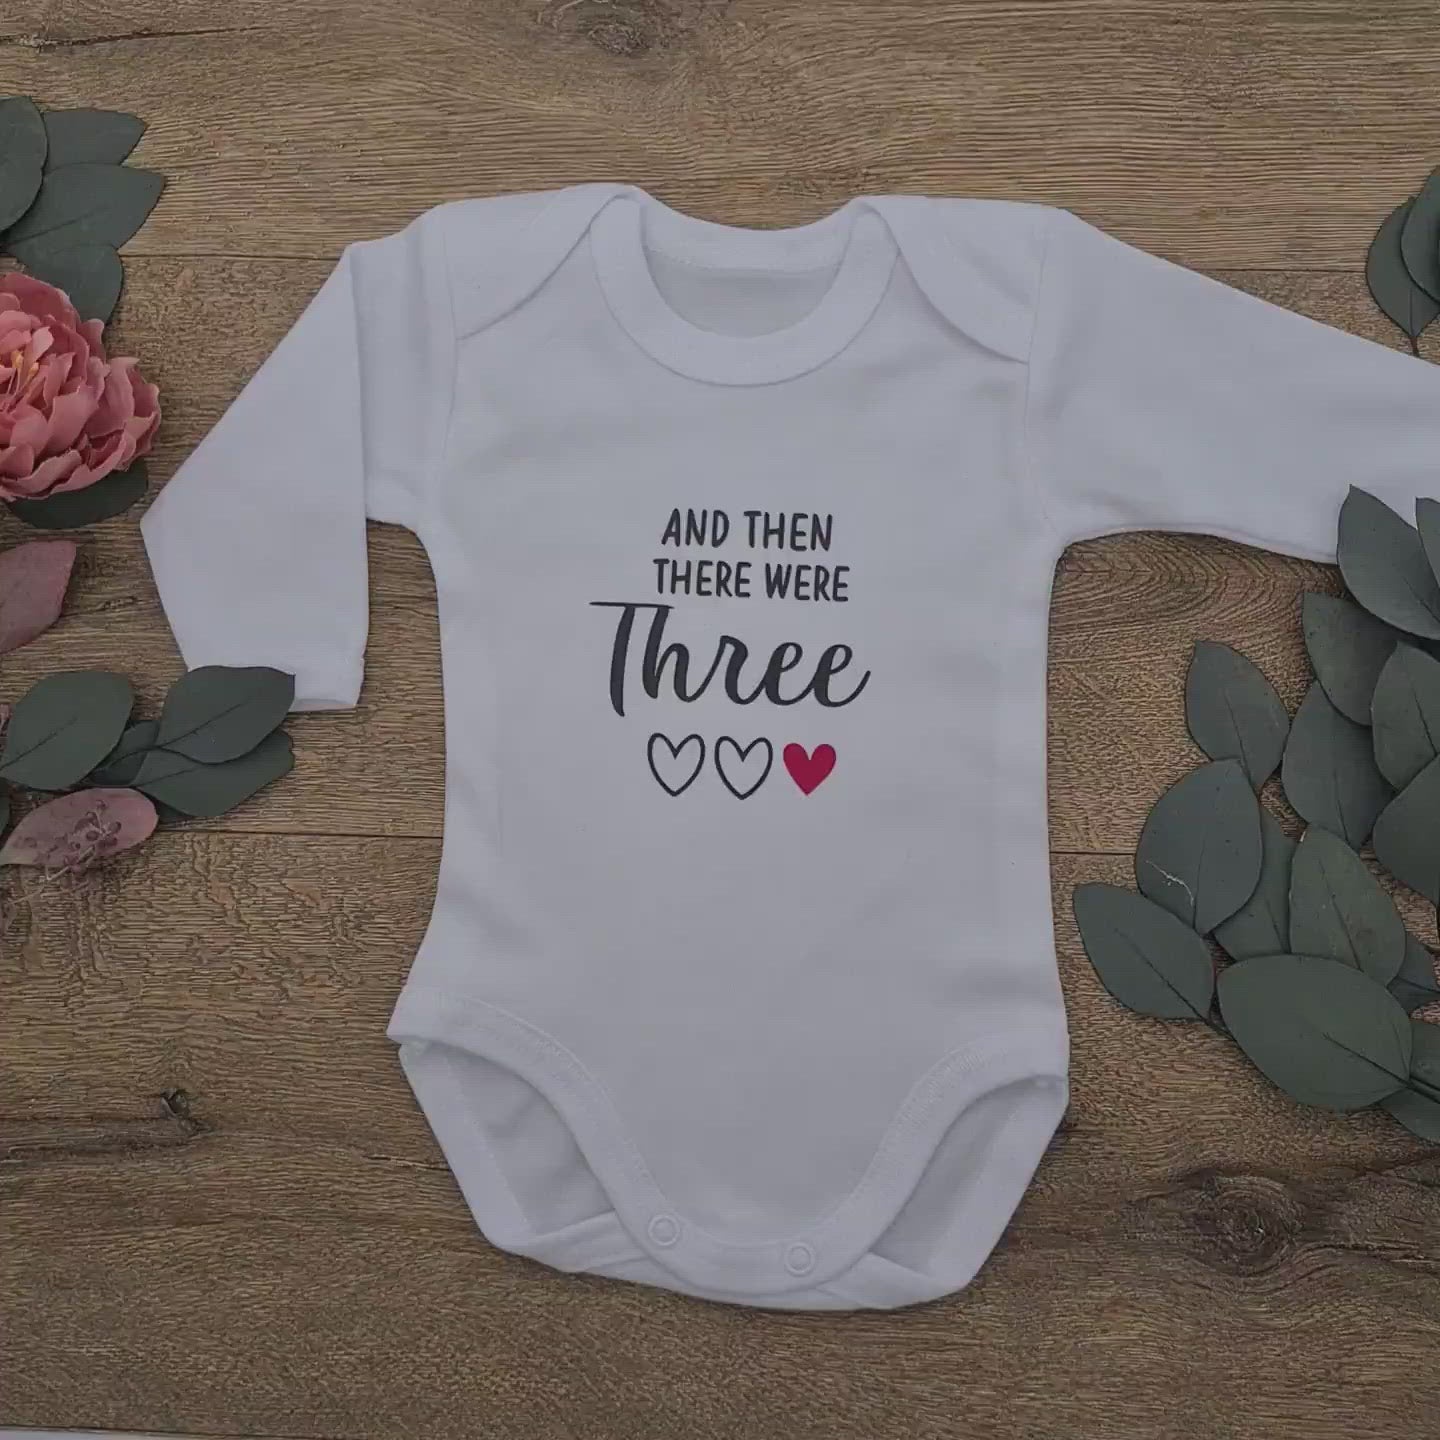 Pregnancy Announcement Onesie - "And then there were Three (3)"